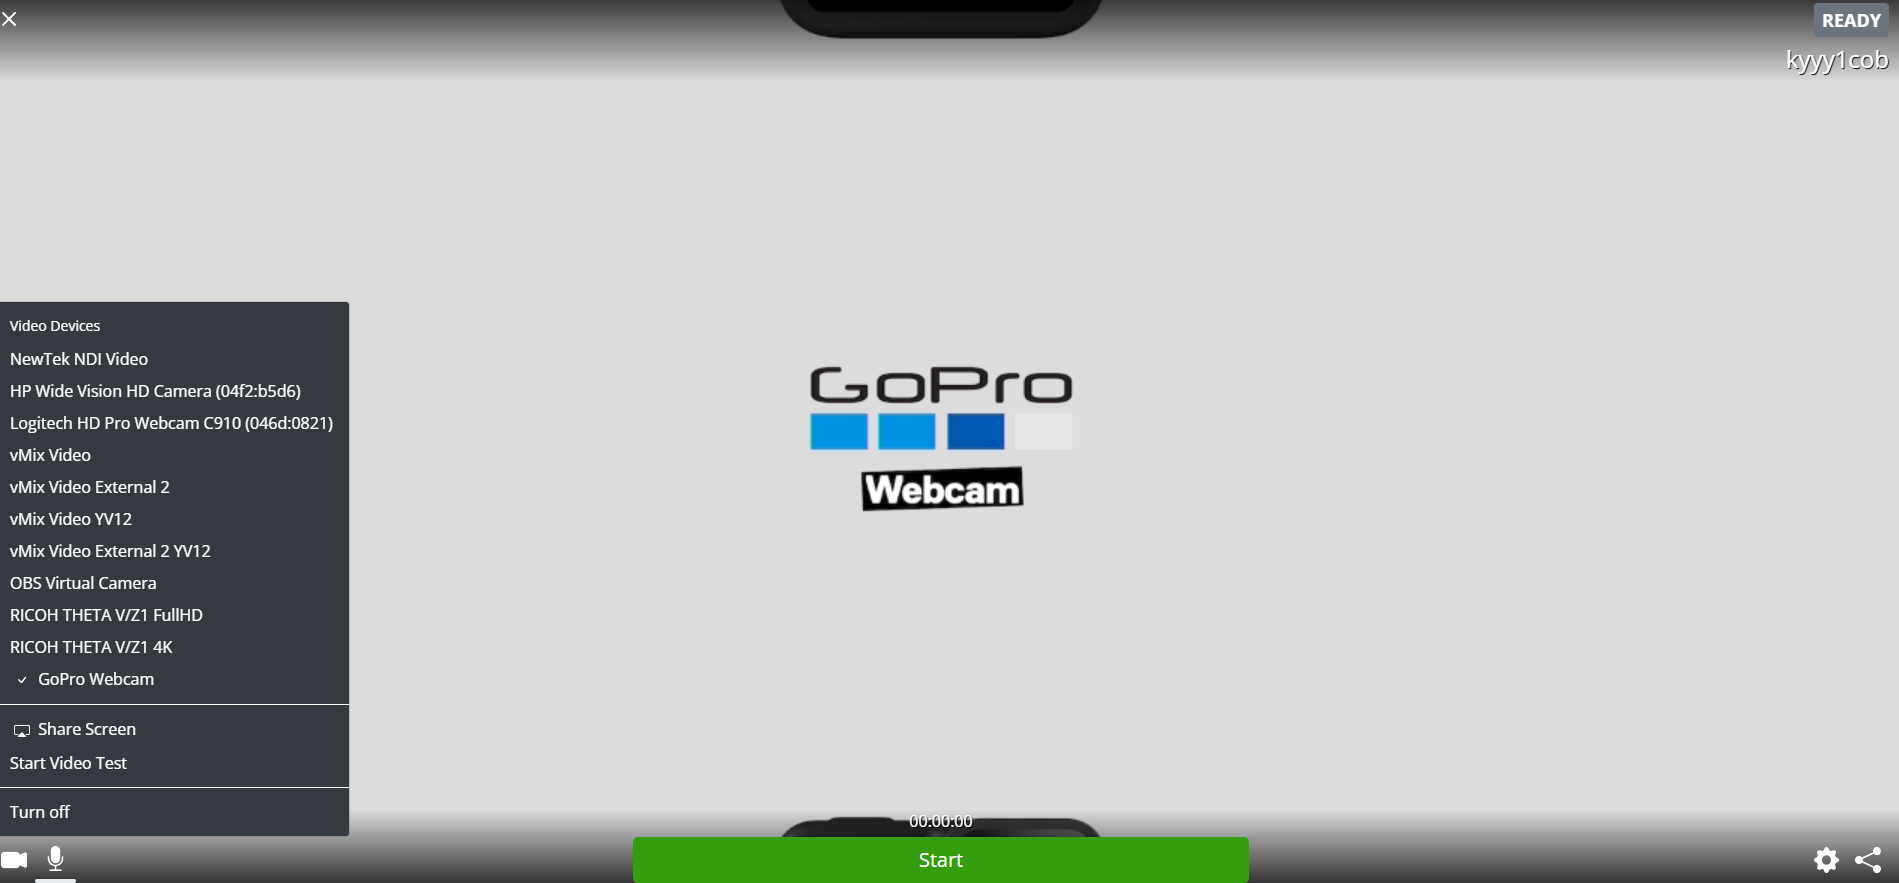 Select GoPro from the available devices